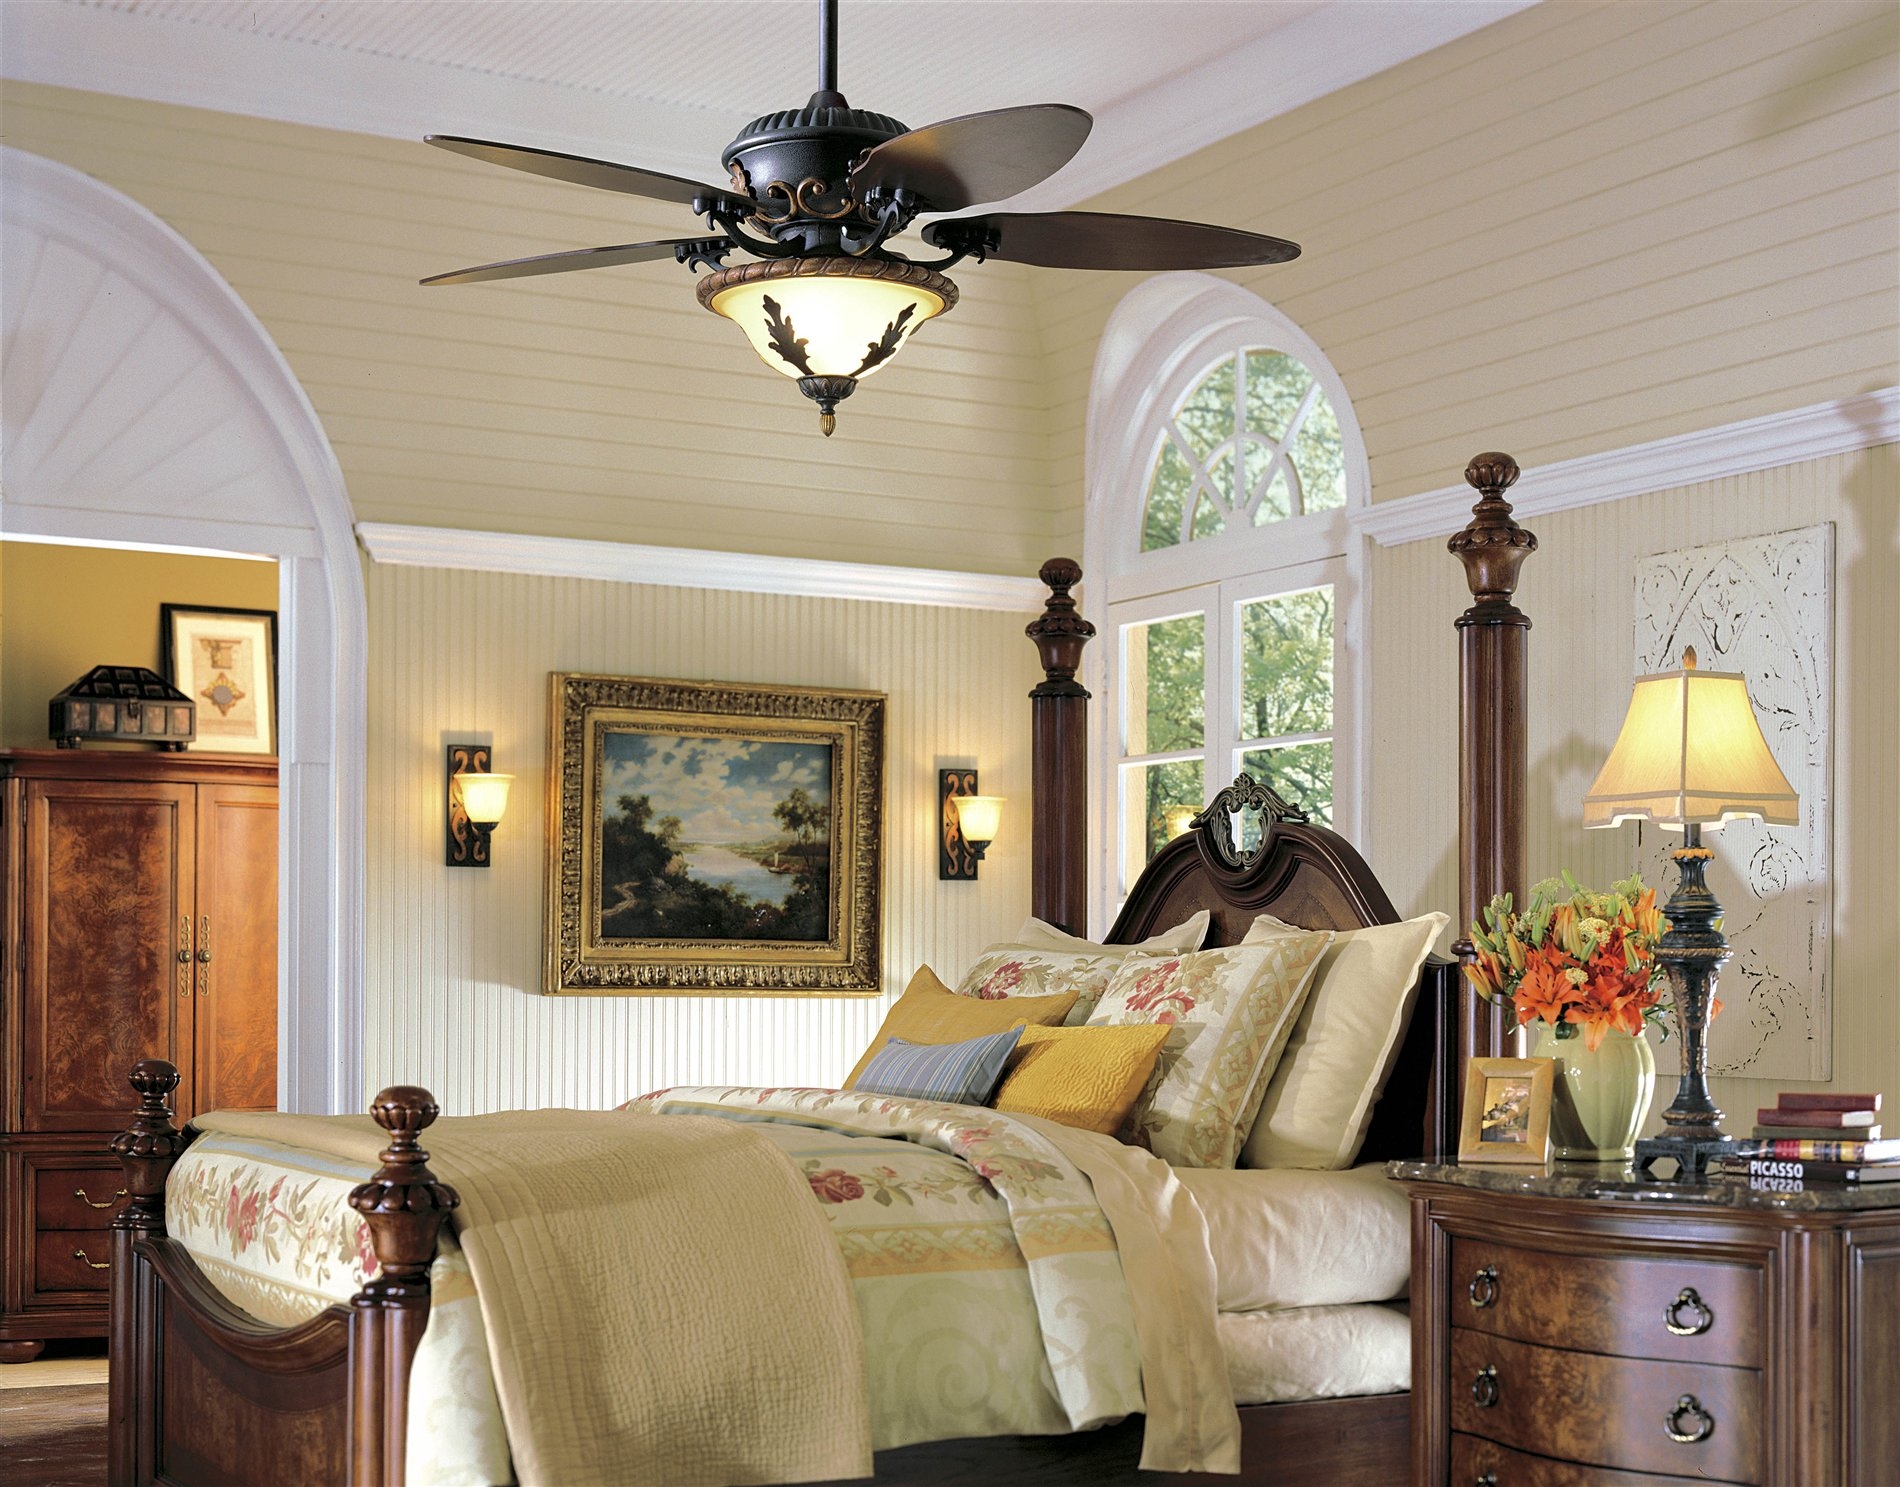 Best Ceiling Fan With Light For Bedroombedroom best ceiling fans for bedrooms ceiling fans for low